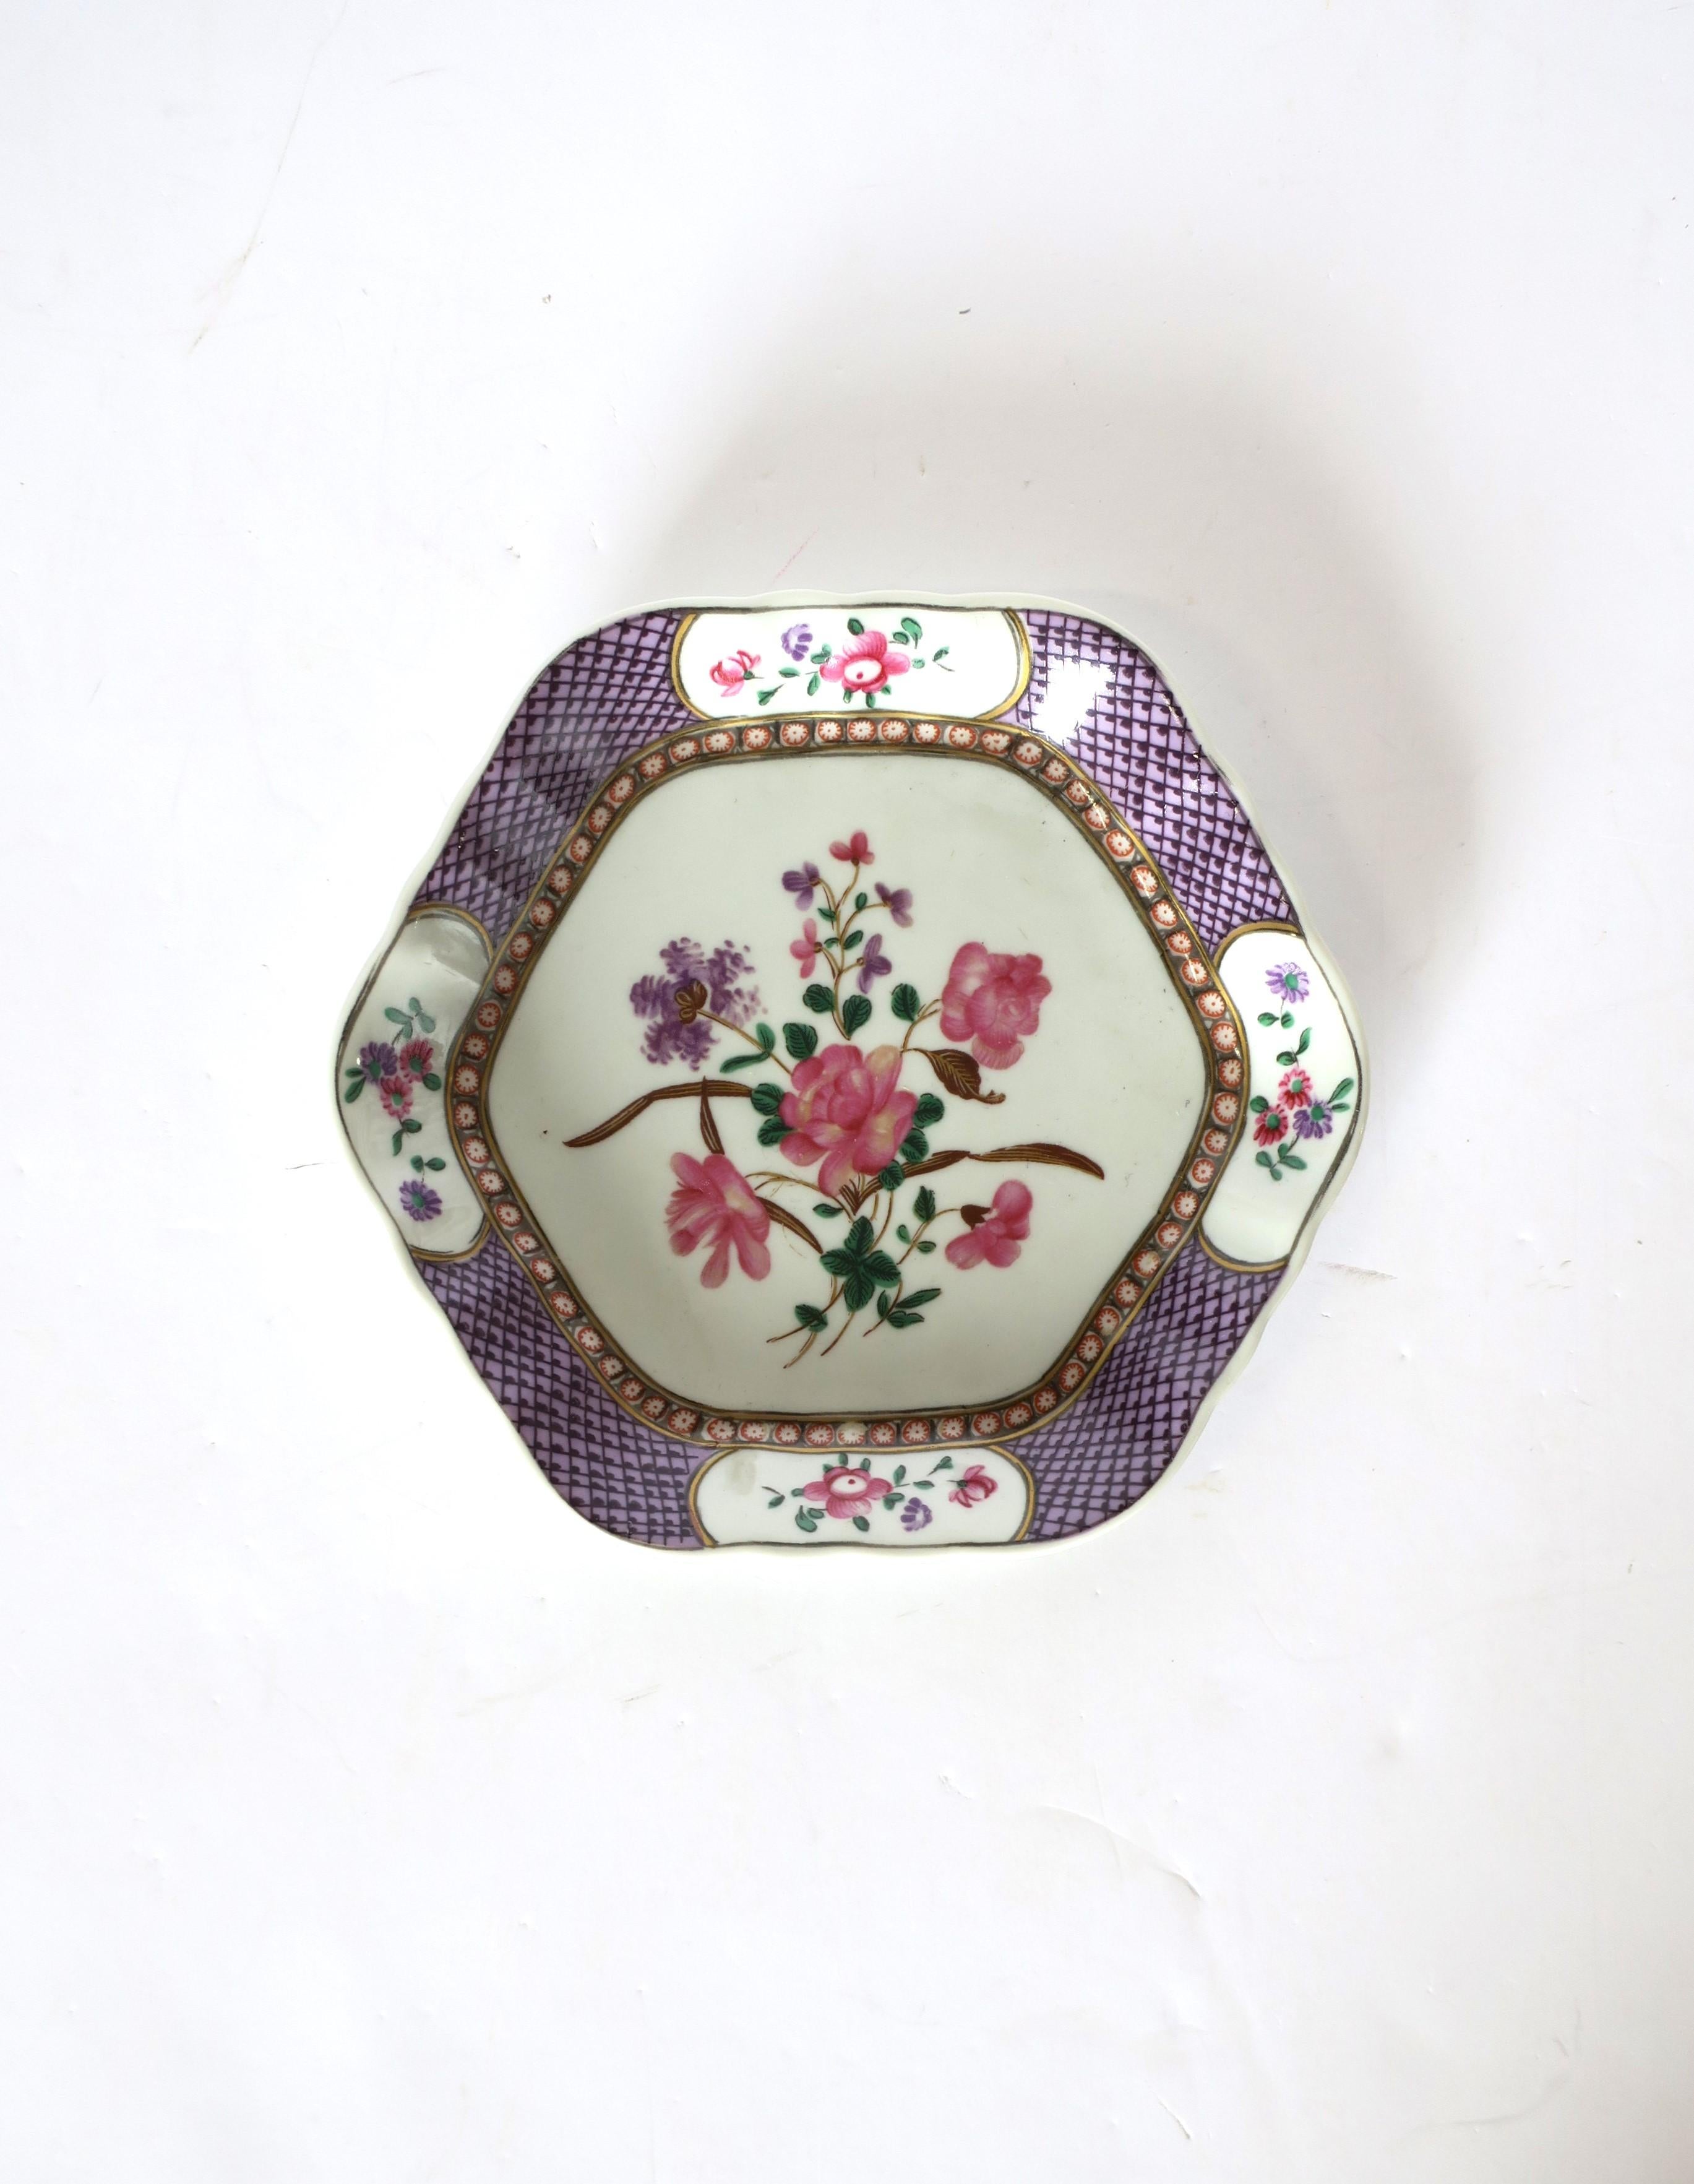 A white and purple hexagon shaped porcelain vide-poche jewelry dish by Mottahedeh for 'The Nelson Rockefeller Collection', circa mid-20th century, made in Portugal. This was a special collection made by Mottahedeh after former US Vice President who